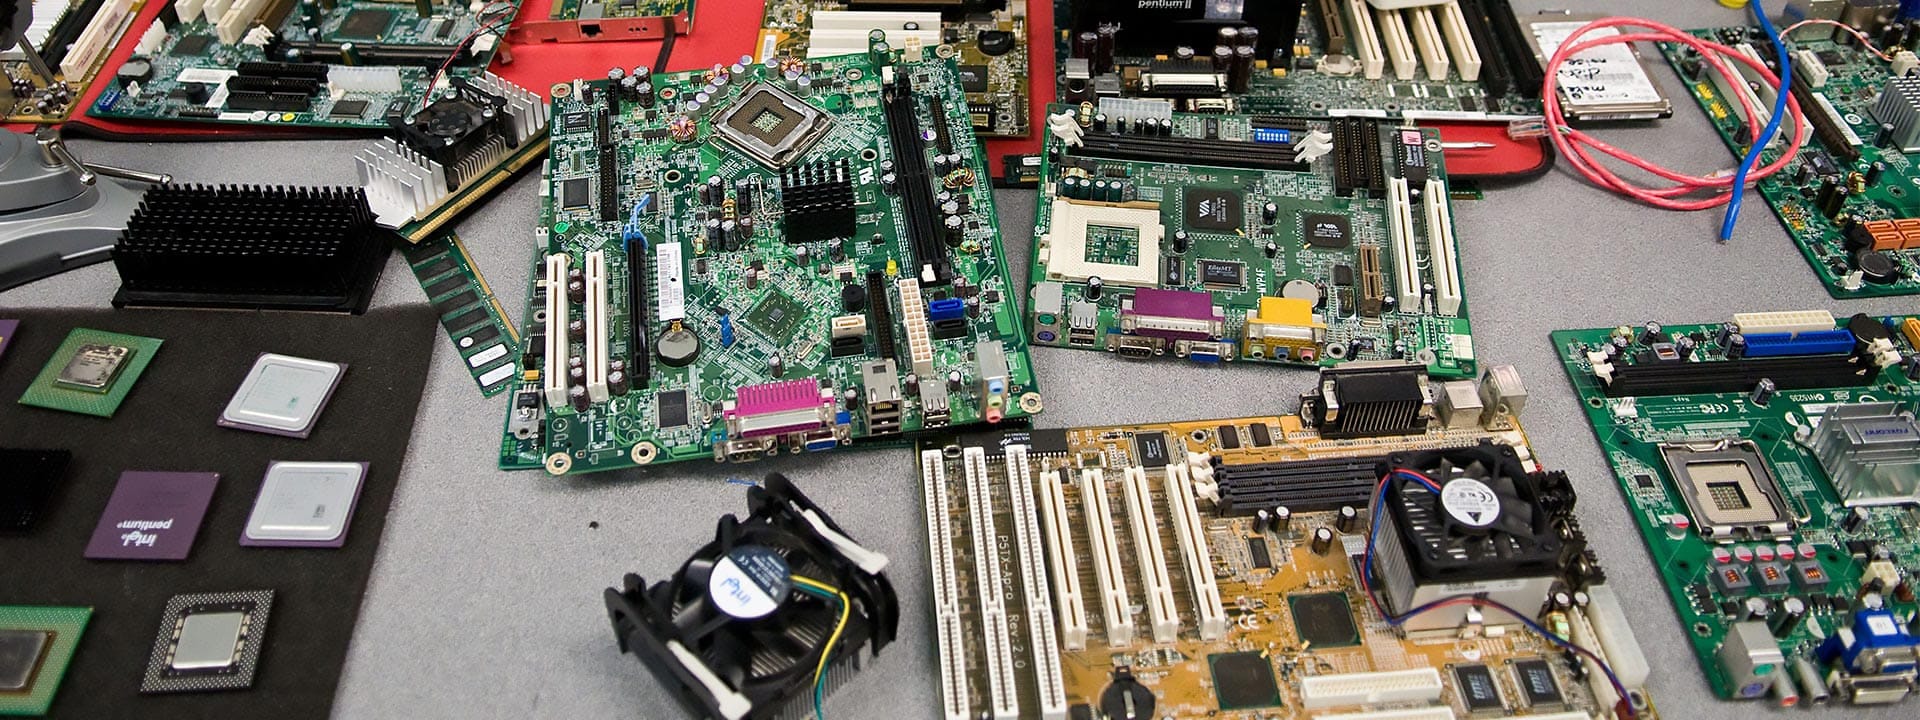 Various motherboards and computer parts